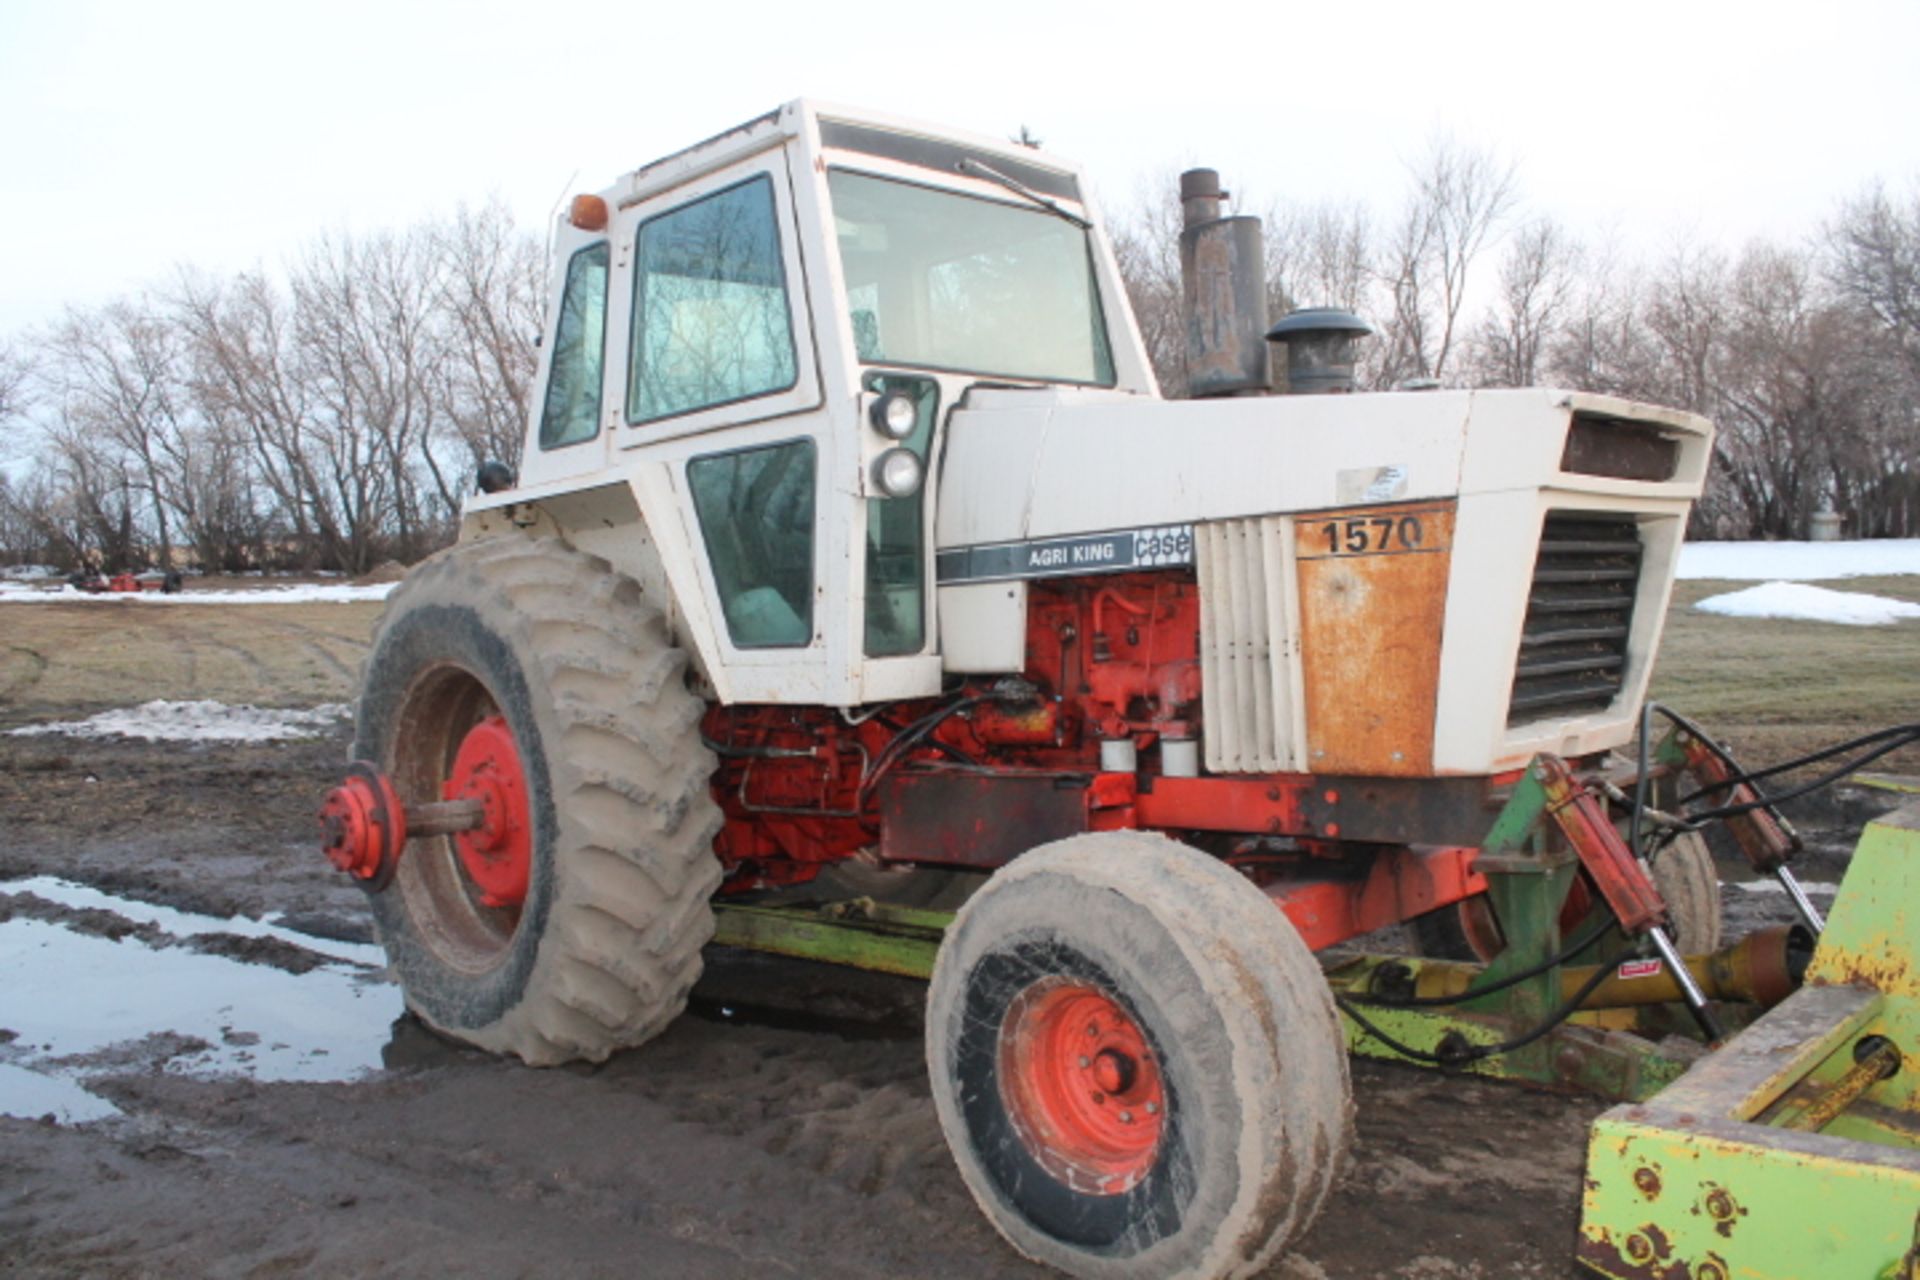 1978 Case 1570, 2 hyds, PTO, 20.8x38 good tires, PS trans.,  showing 6569hrs, SN 8819944 NOTE - Image 3 of 10